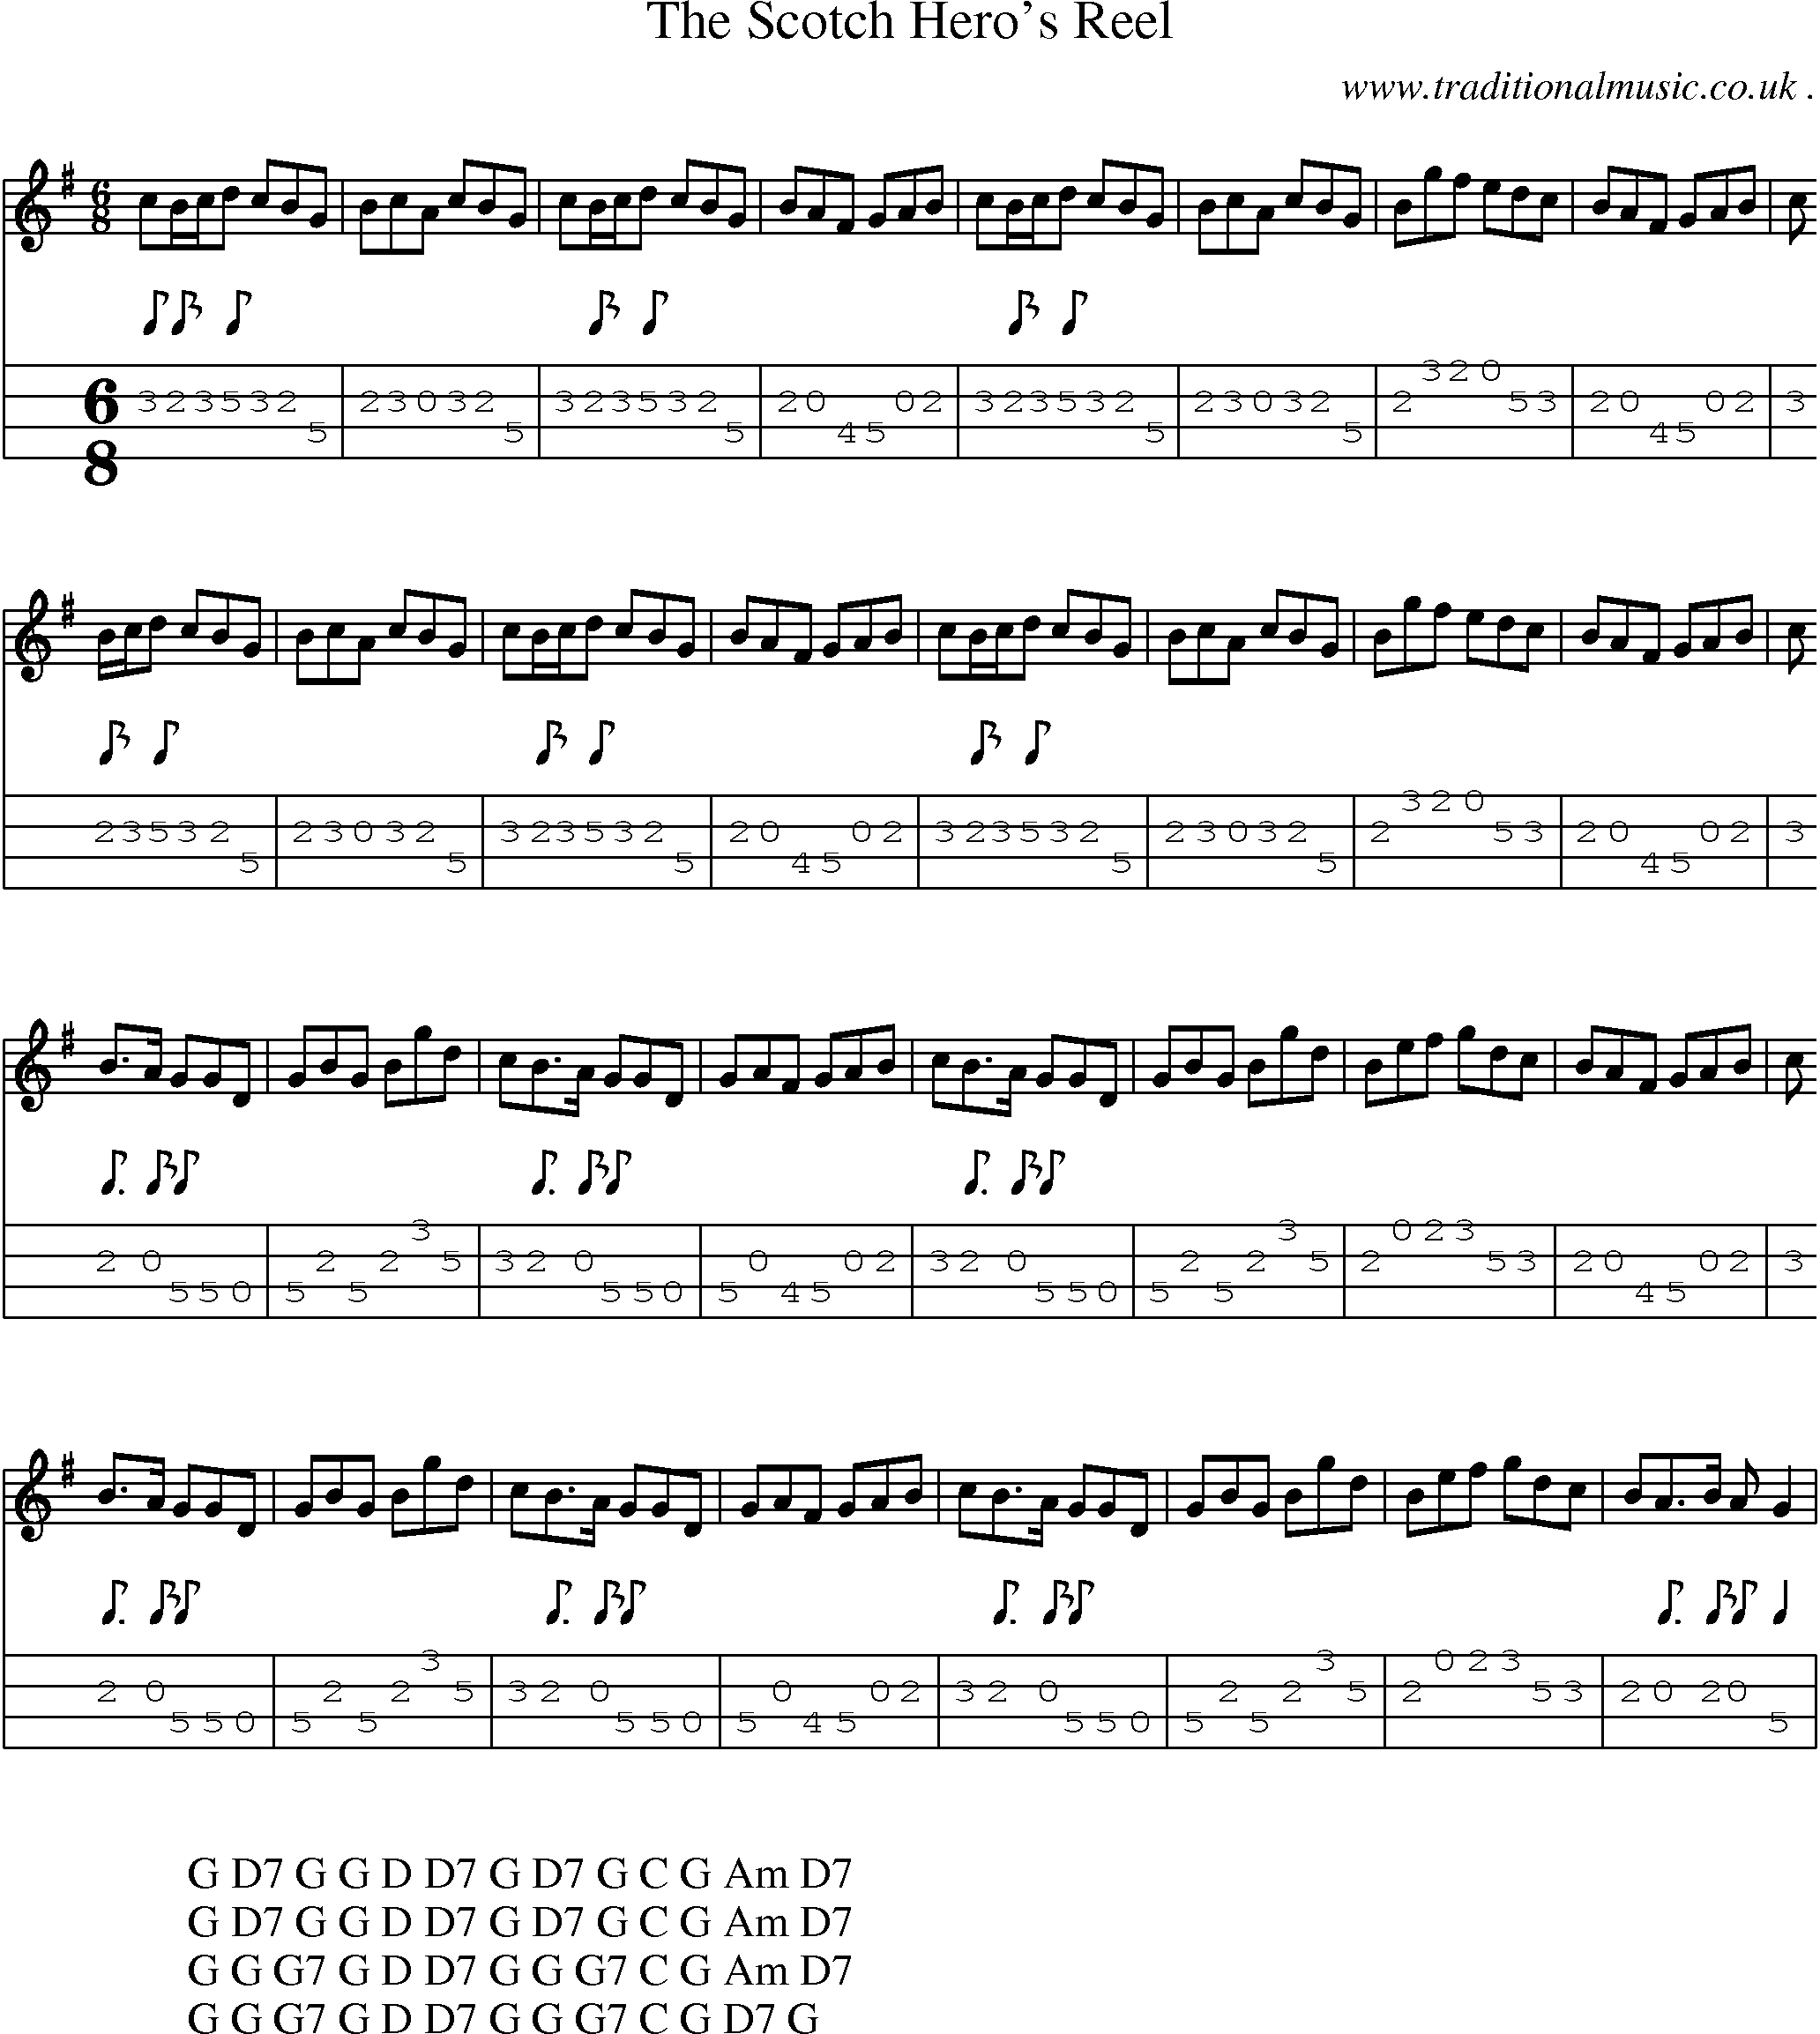 Sheet-Music and Mandolin Tabs for The Scotch Heros Reel